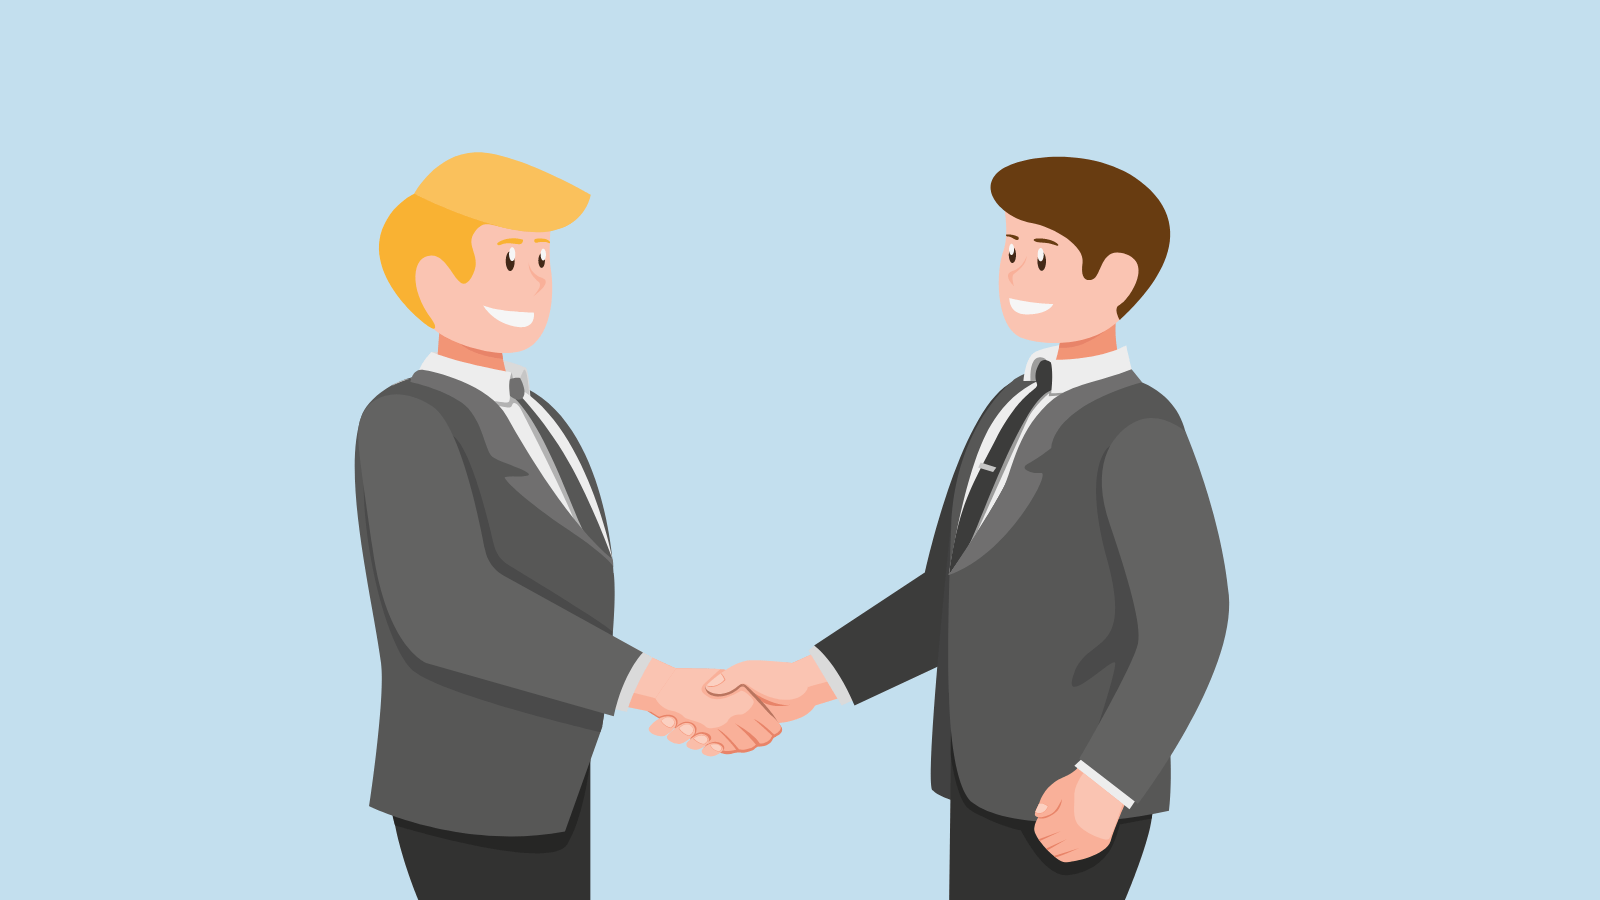 Two men in business suits shaking hands